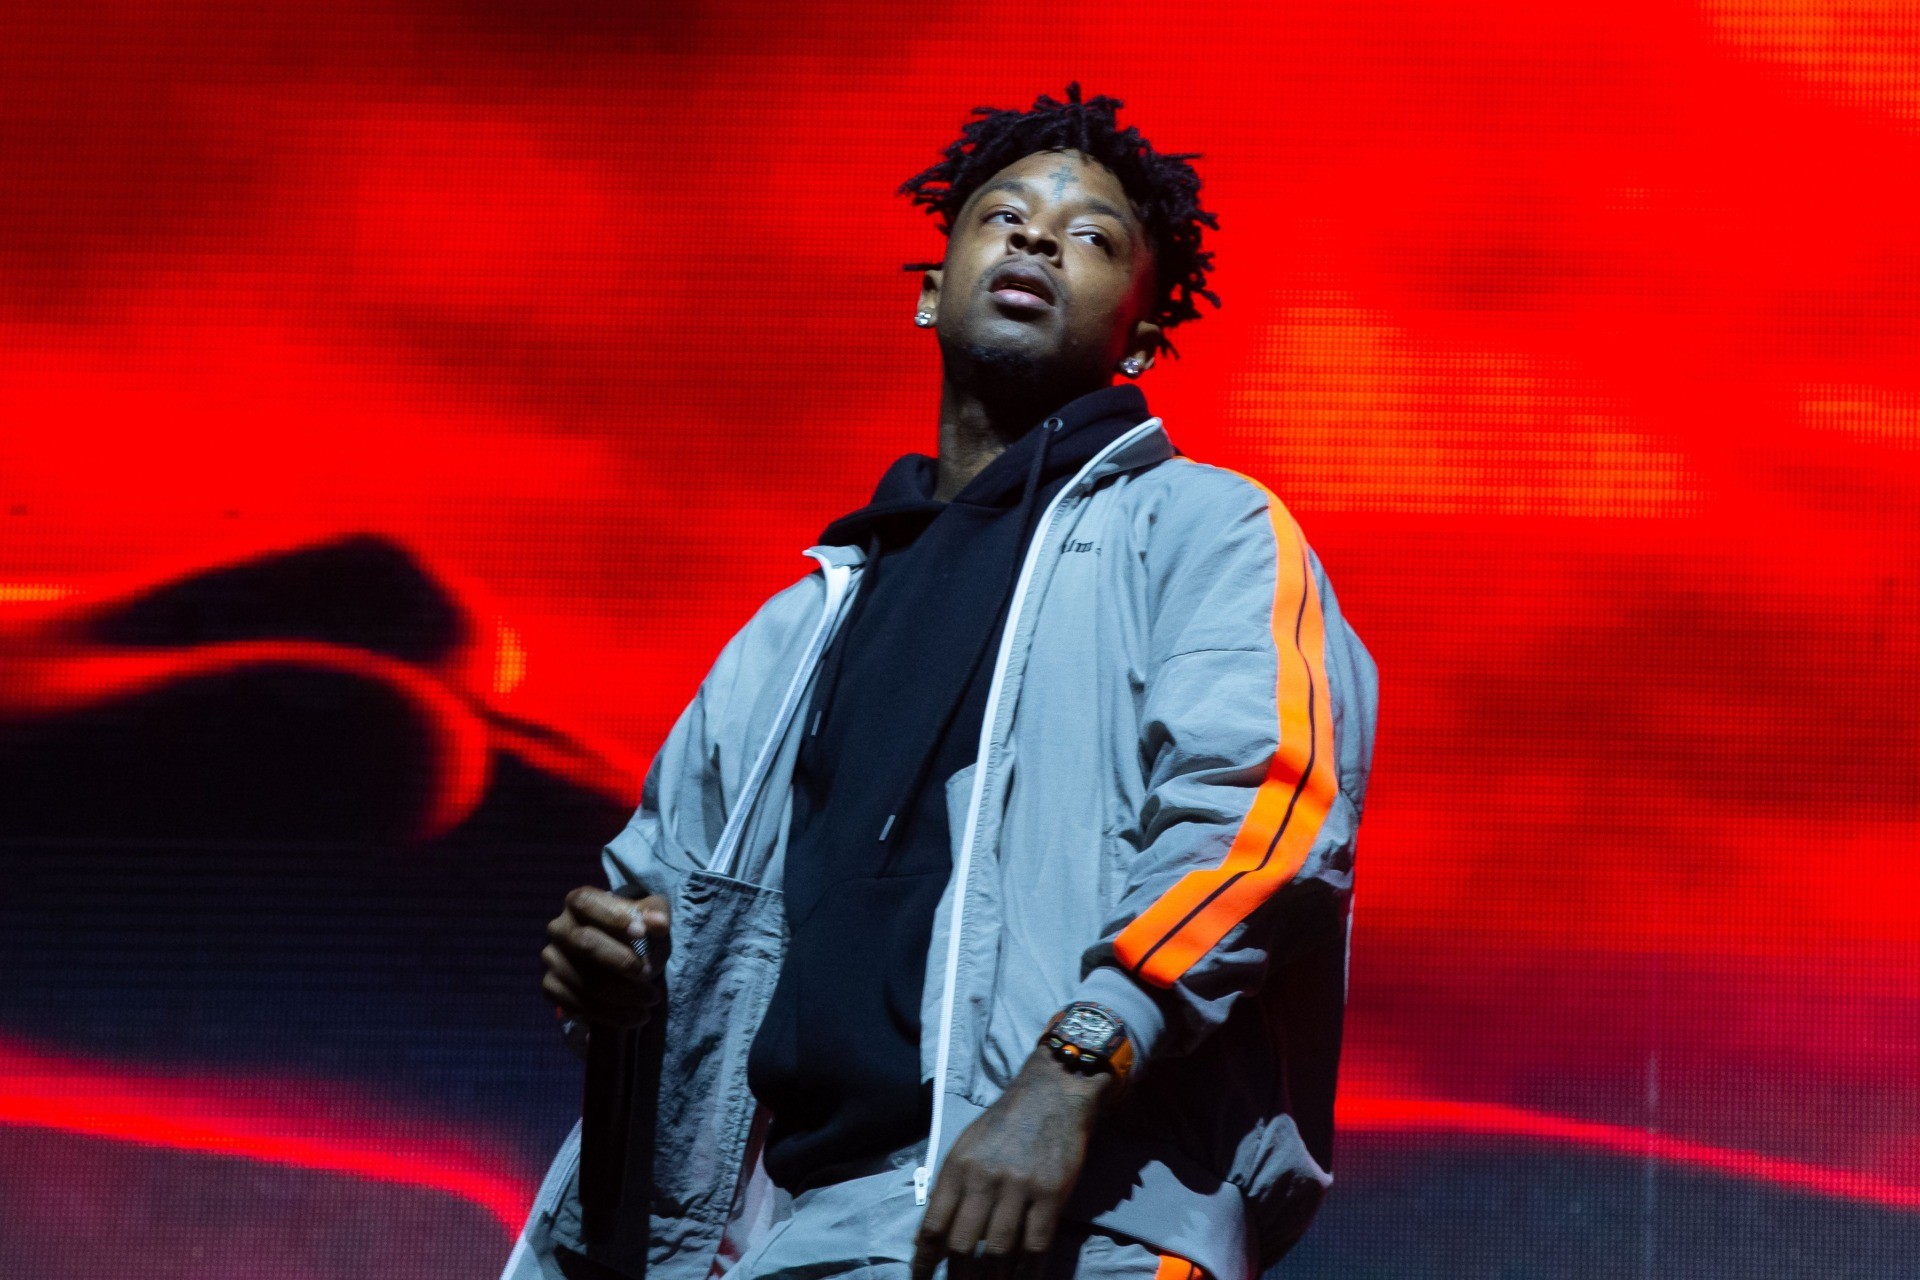 Rapper 21 Savage Turns Himself in to Face Drug and Gun Charges, Possible De...